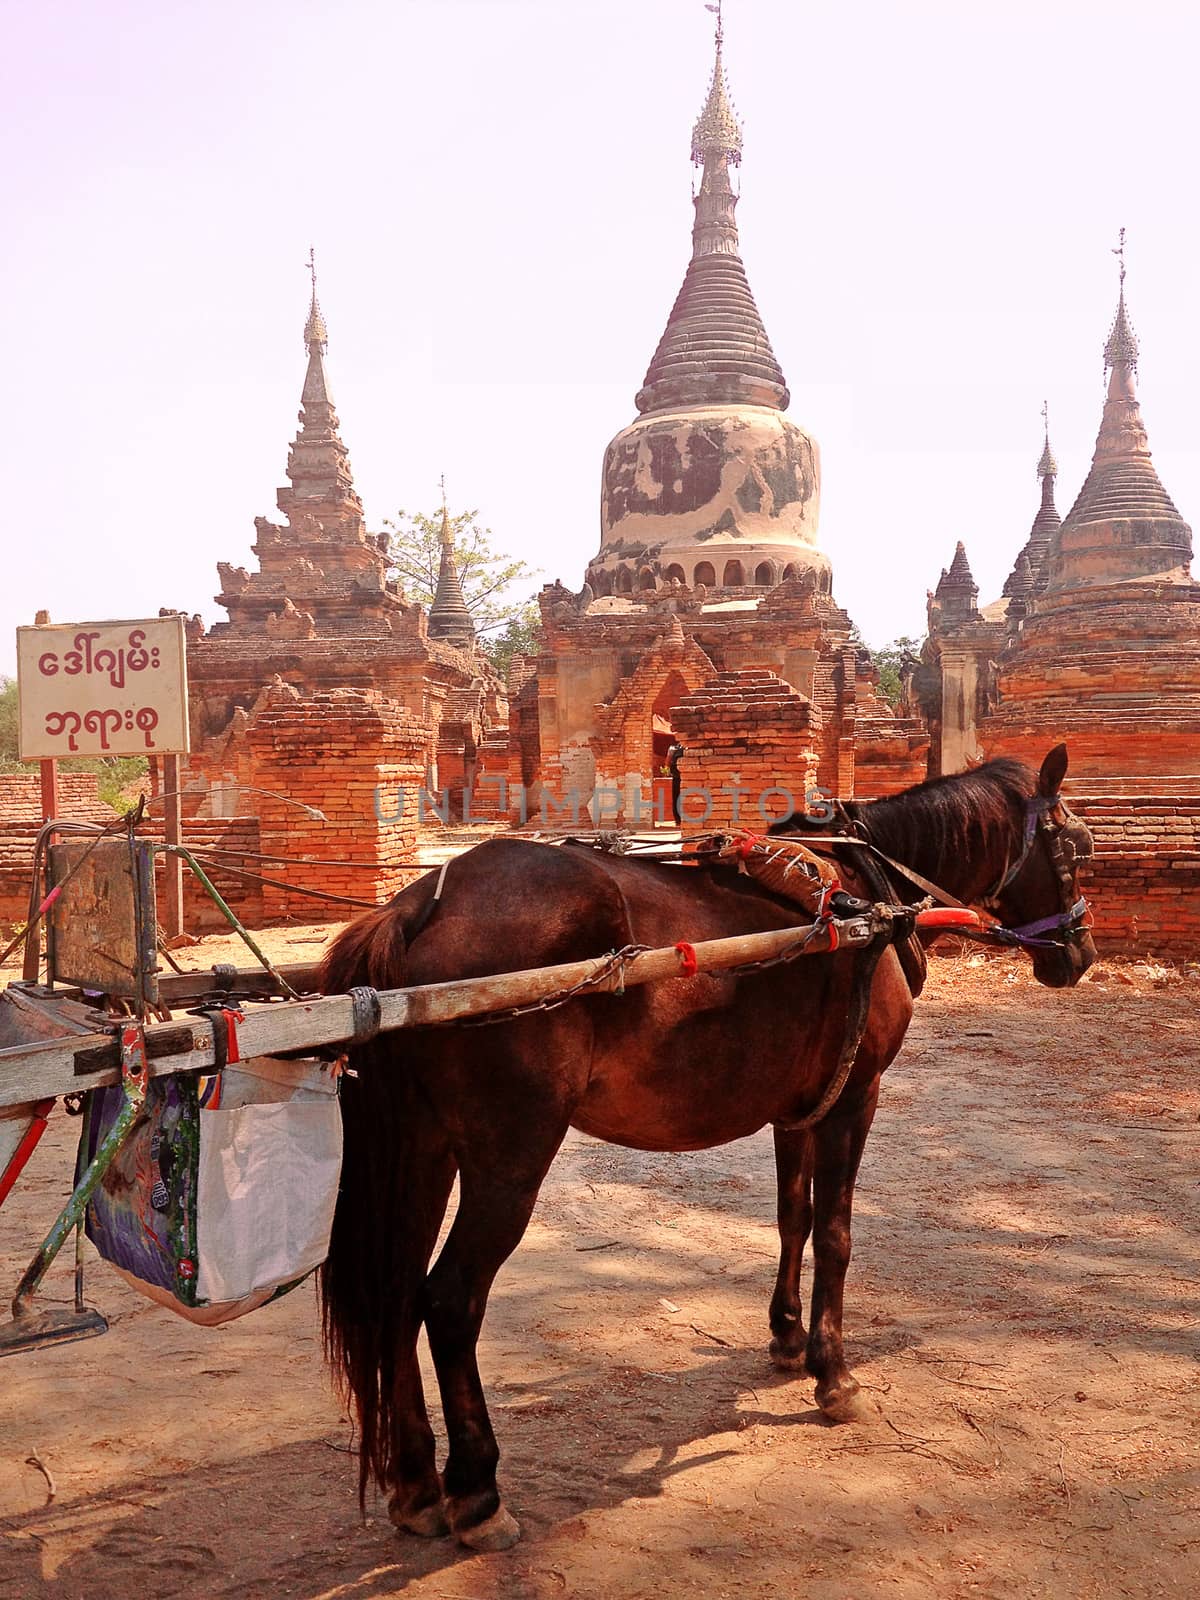 Horse Drawn Carriage parking in front of Temple in Inwa ancient city, Mandalay Myanmar